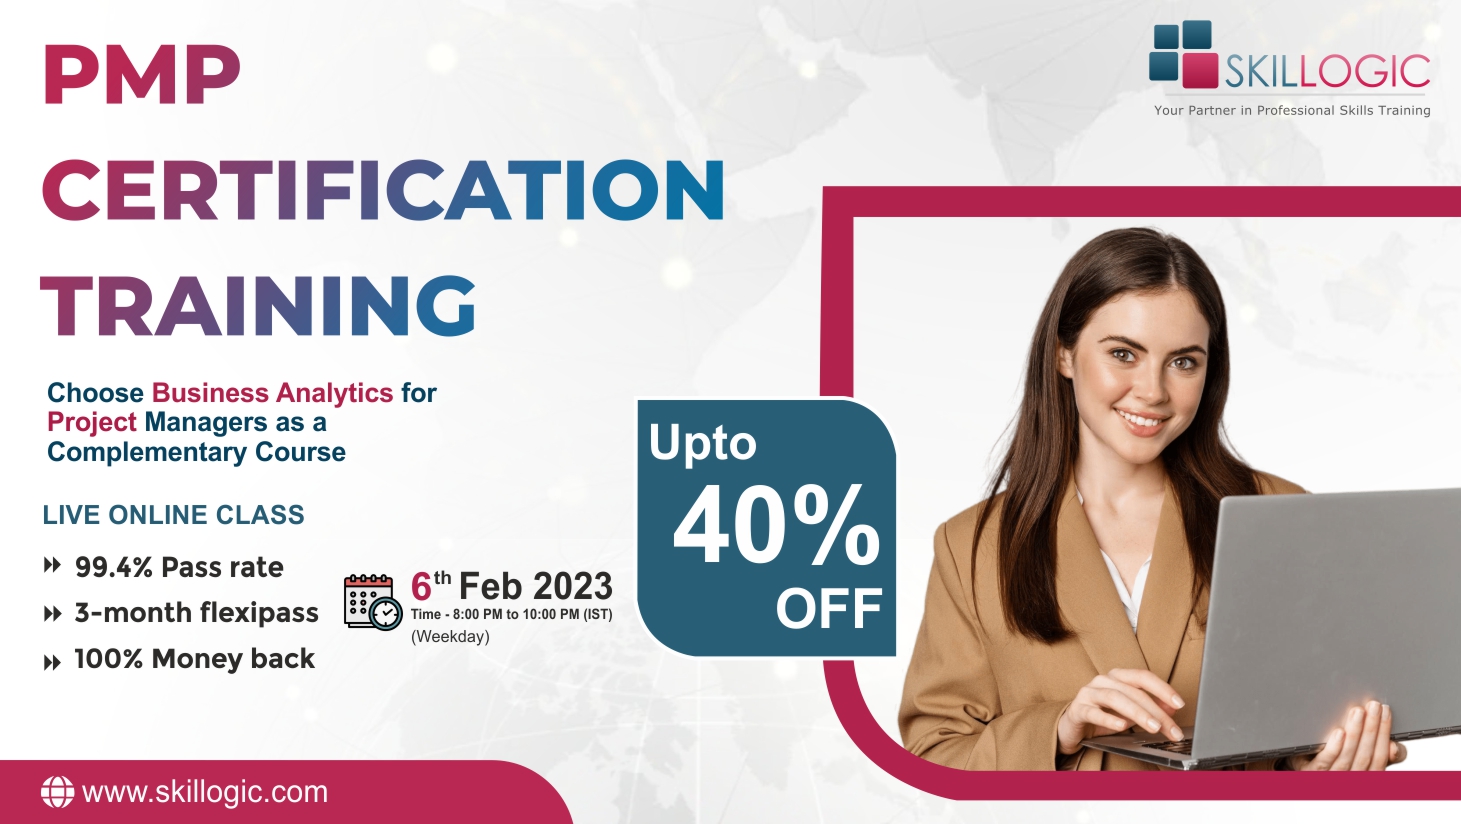 PMP Course in Trivandrum, Online Event